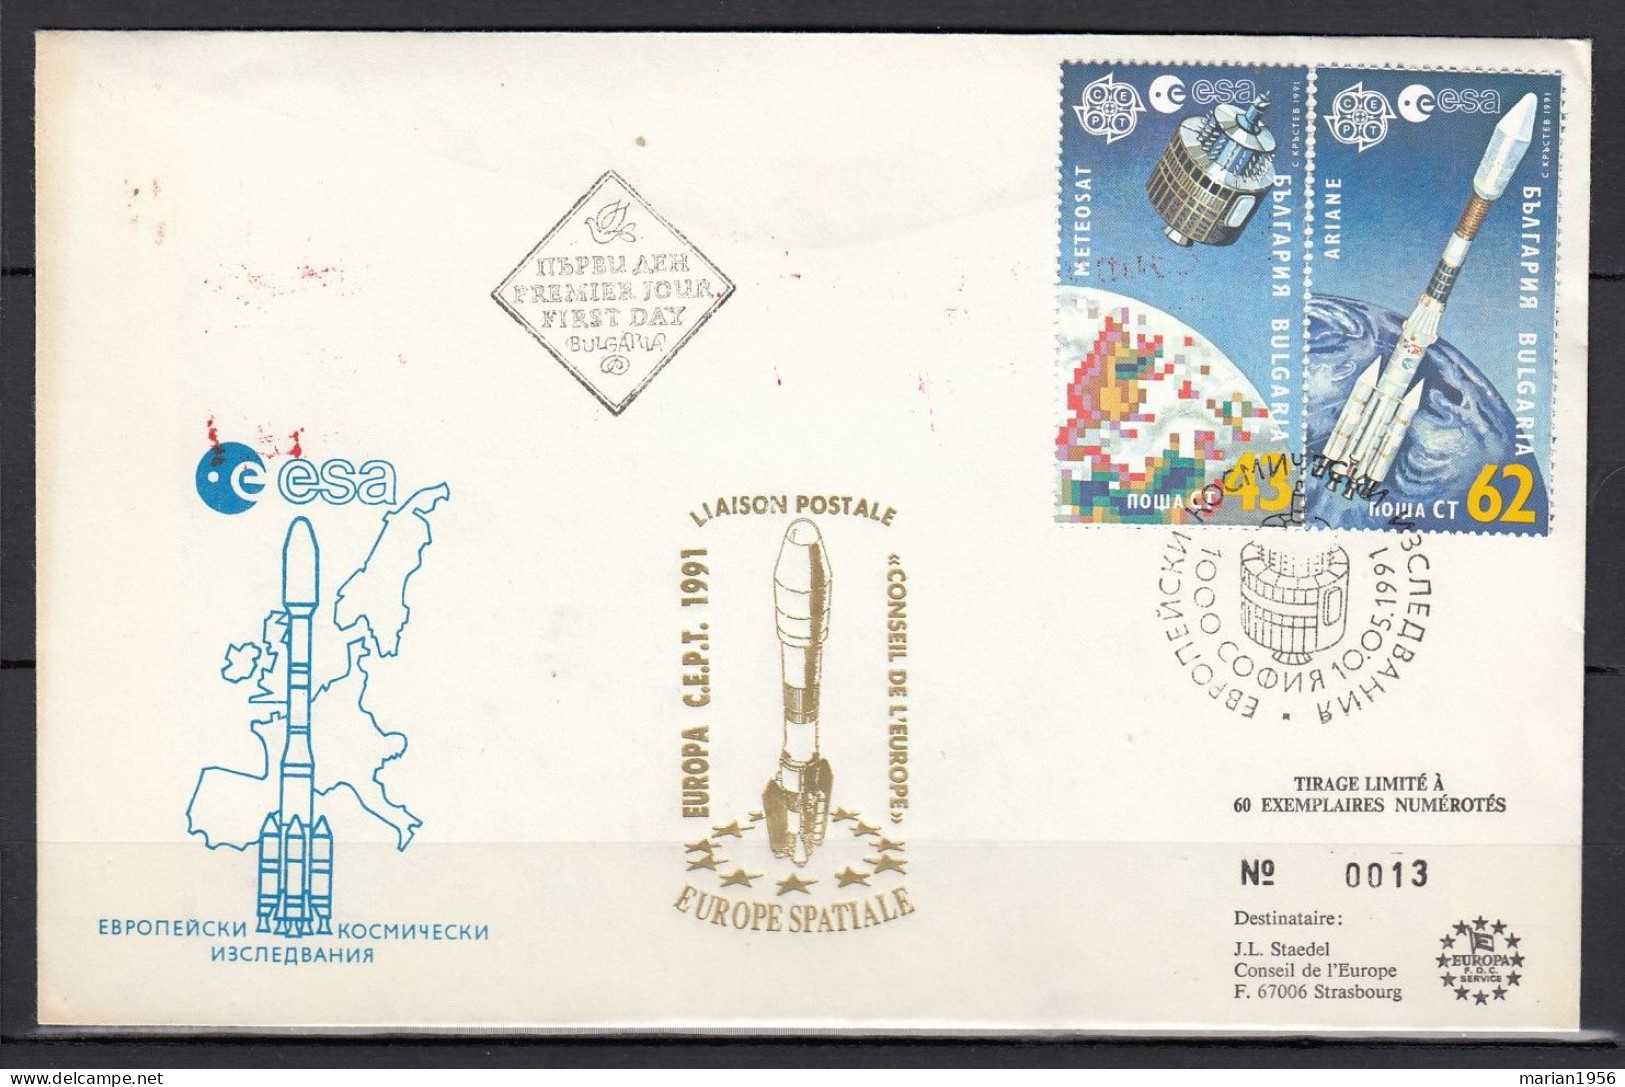 Bulgarie 1991 - FDC Special - EUROPA CEPT - Europe Spatiale - Tirage Limite A 60 Ex.numerotes - 1991